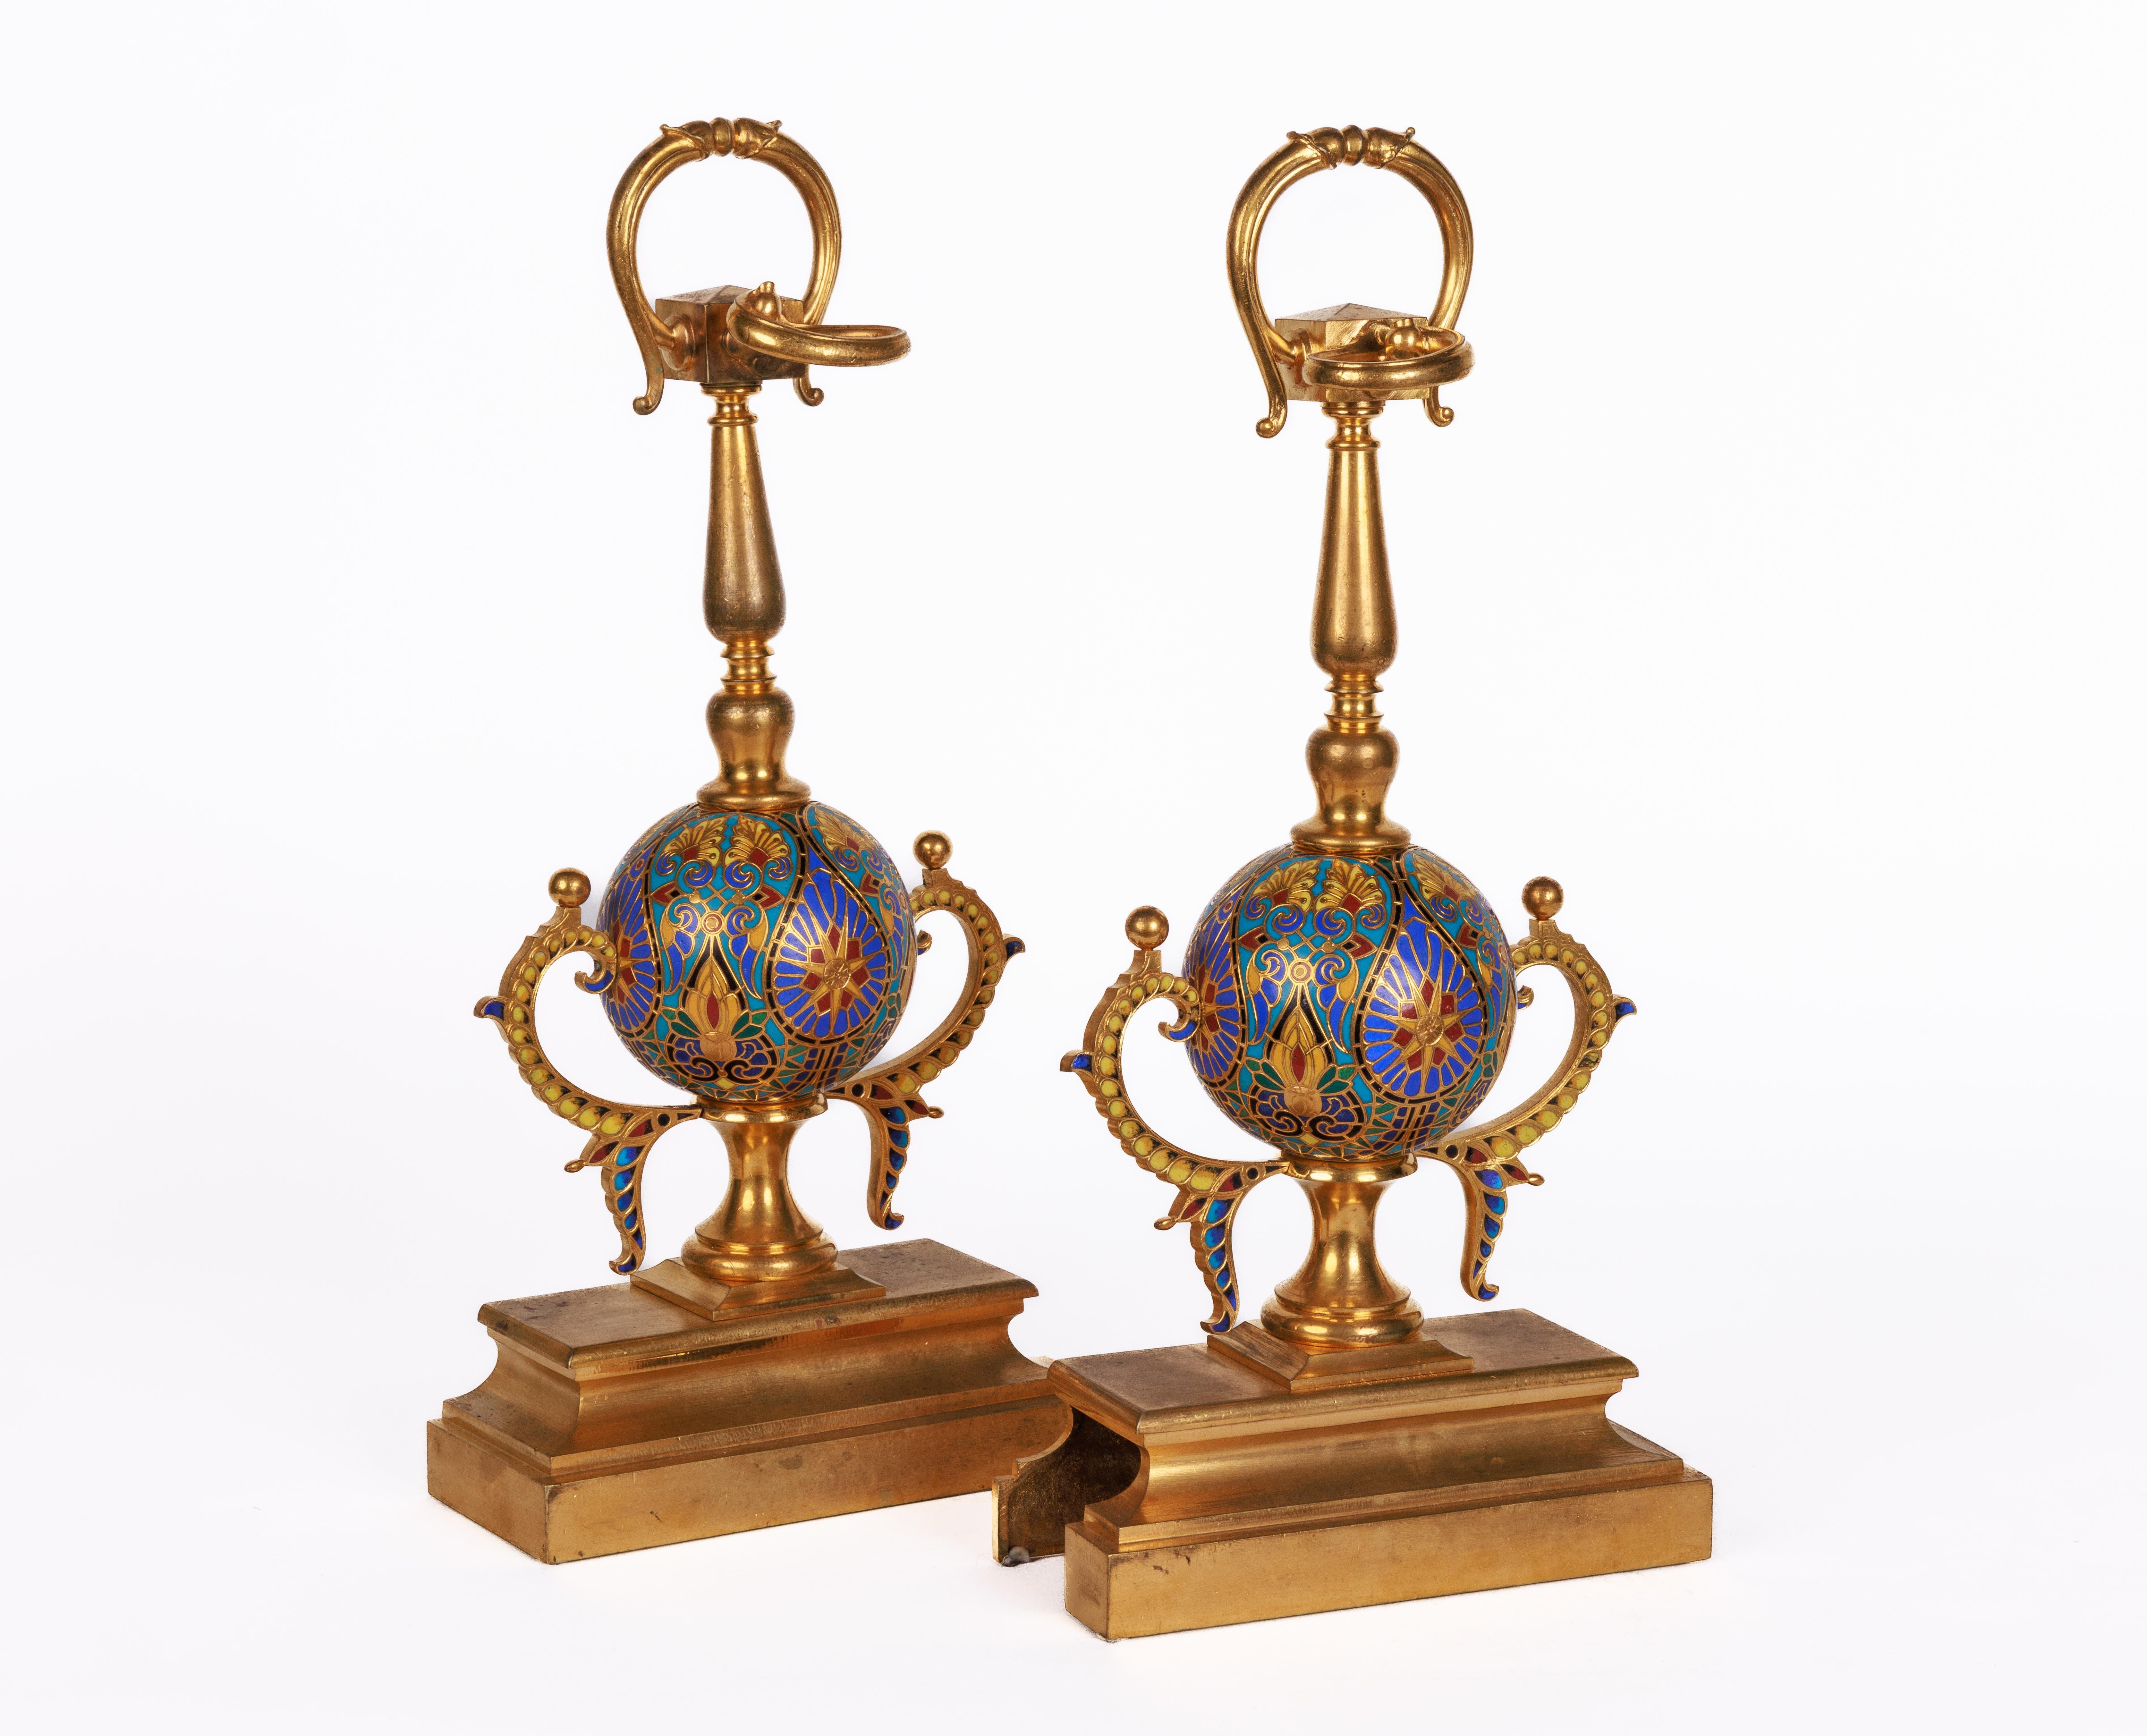 Ferdinand Barbedienne, A Pair of French Ormolu and Champleve Enamel Andirons For Sale 3